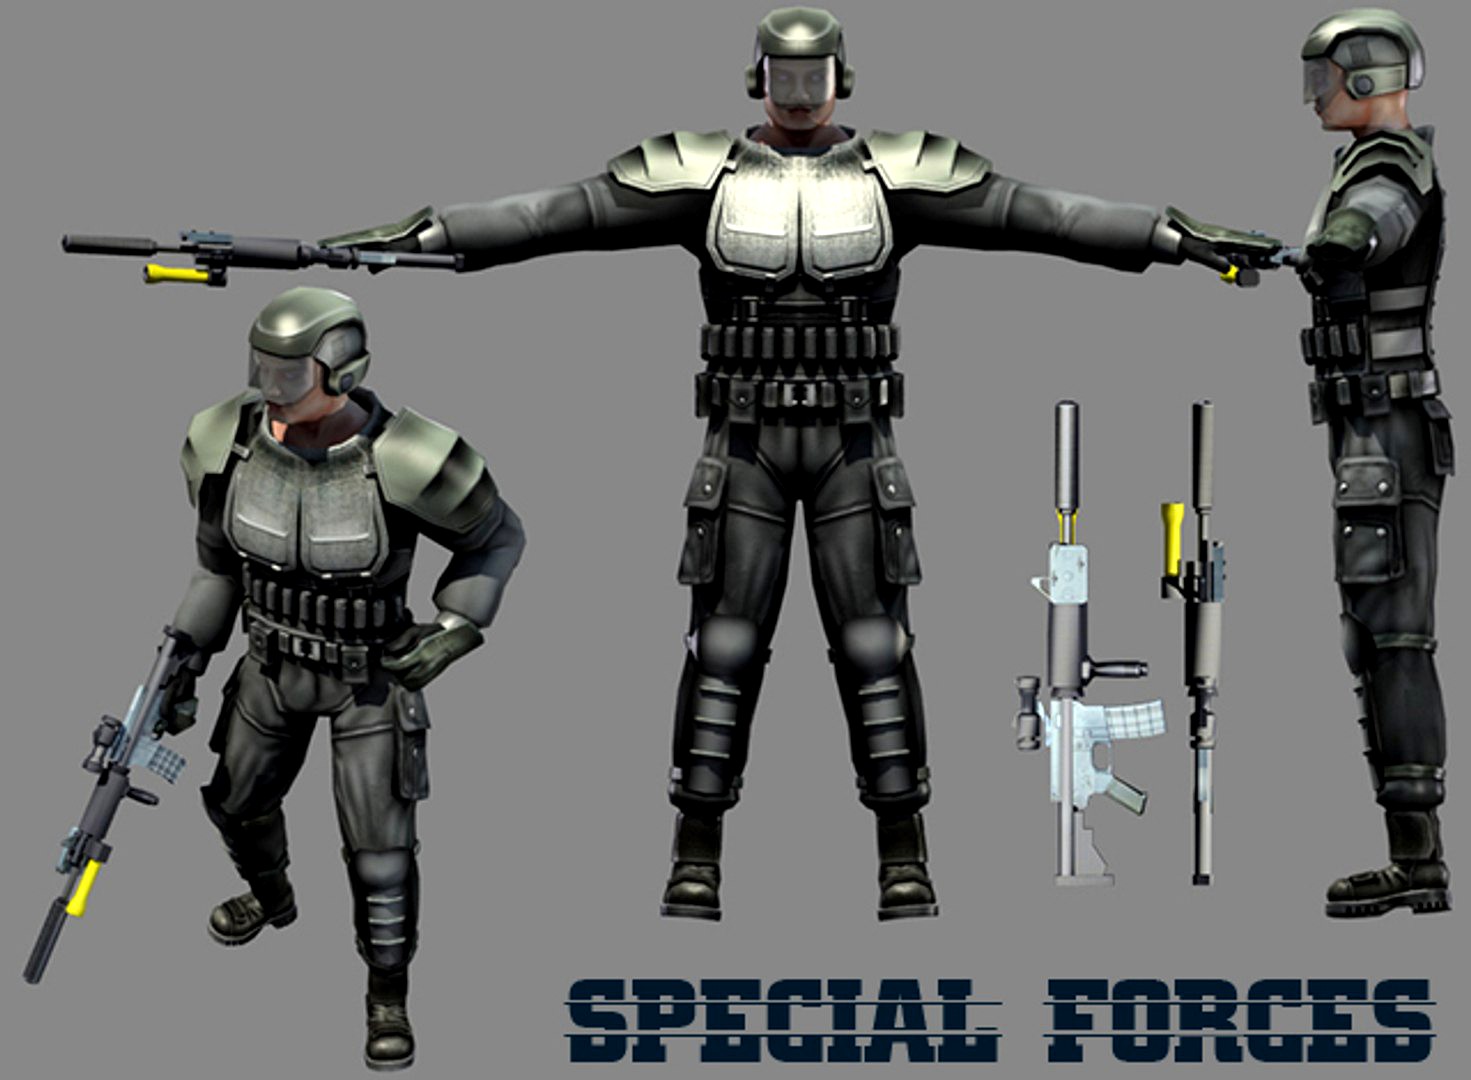 Special Force Soldier